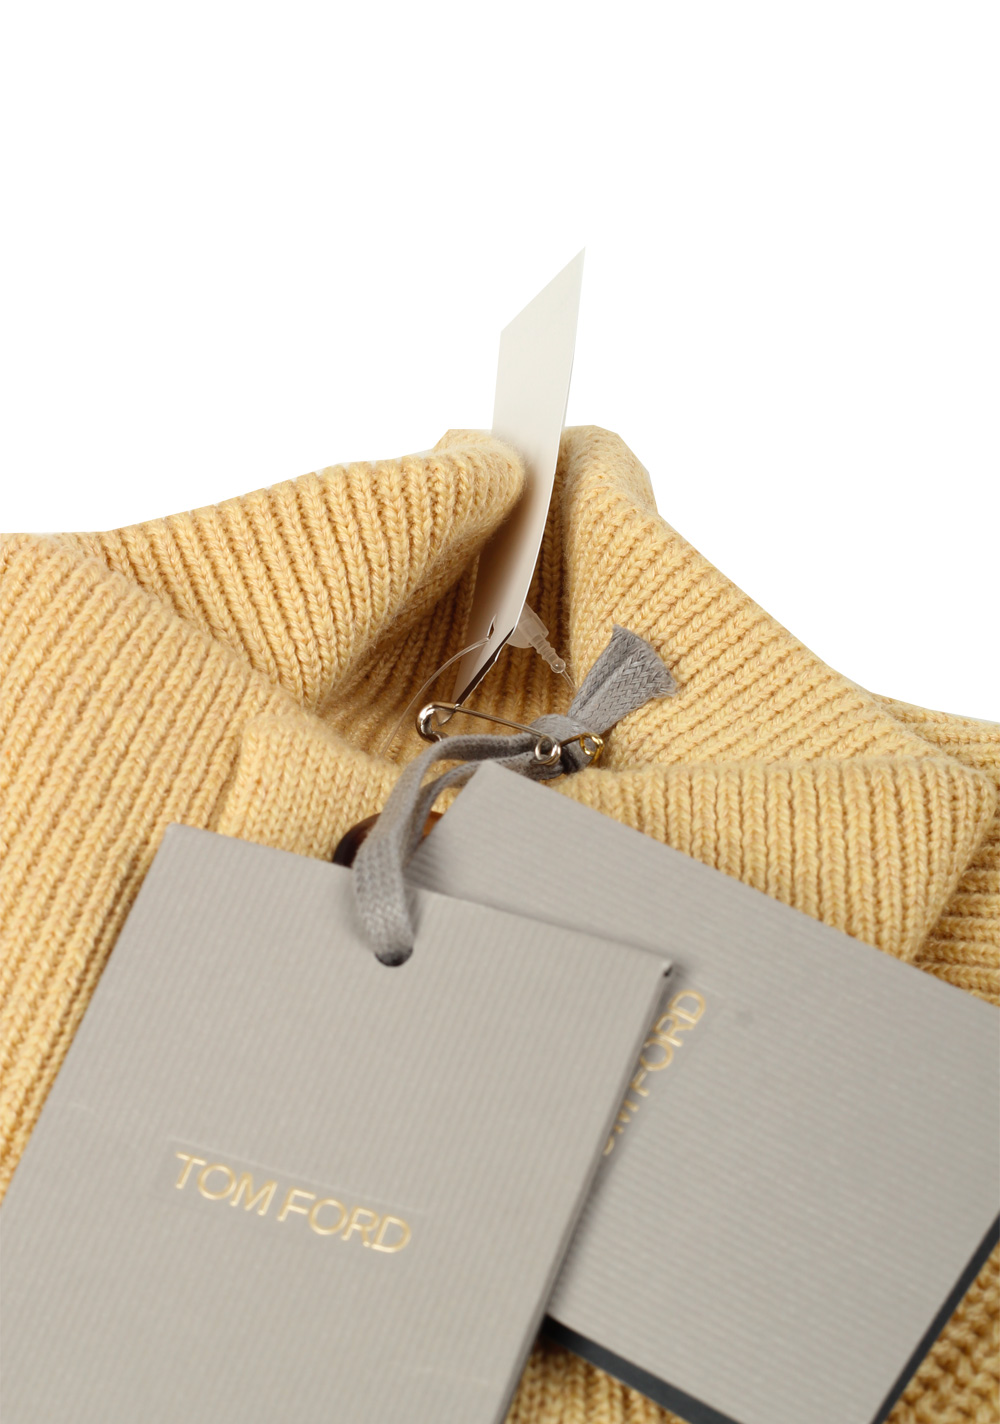 TOM FORD Yellow Funnel Collar Sweater Size 48 / 38R U.S. In Cashmere Linen | Costume Limité